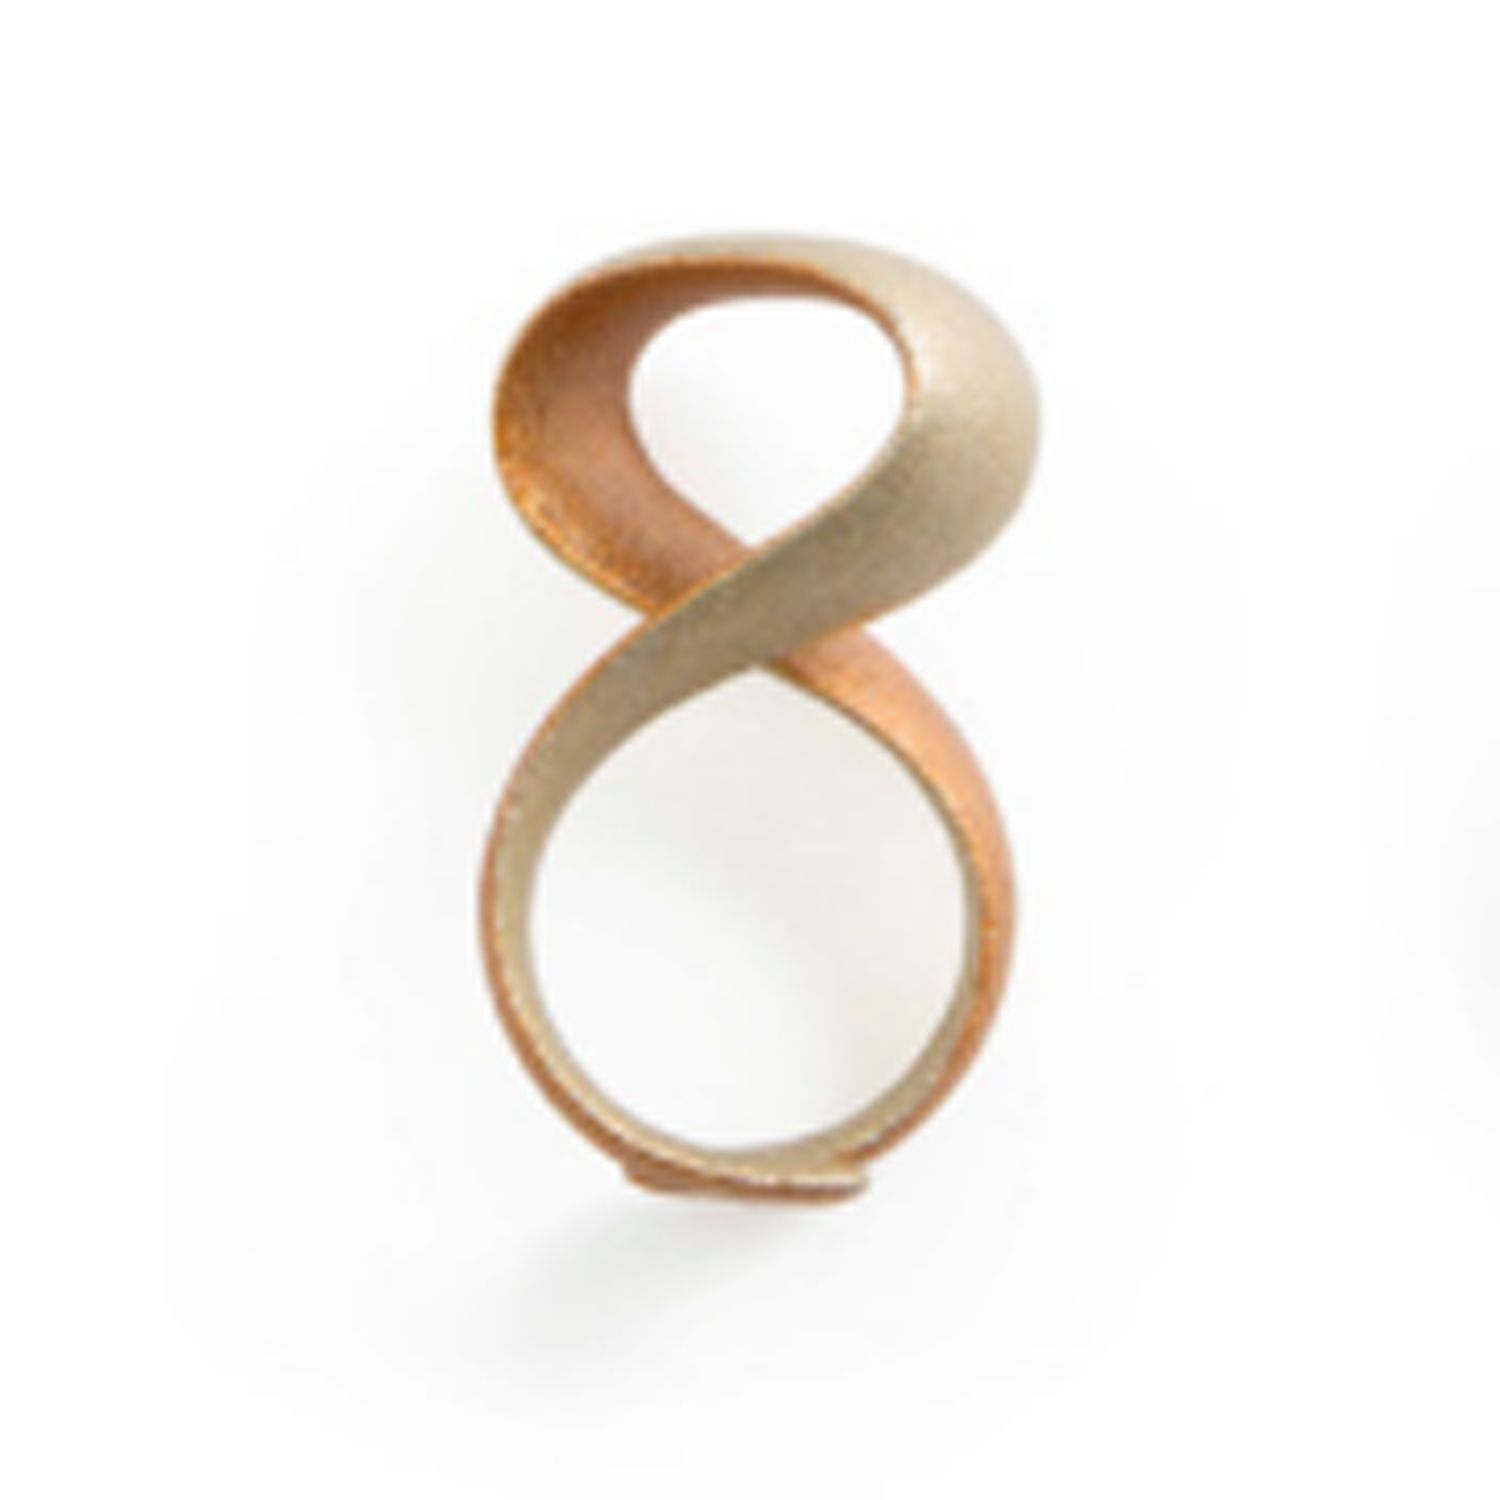 Maison 203: Flow Ring Rose Gold Silver Product Image 1 of 1